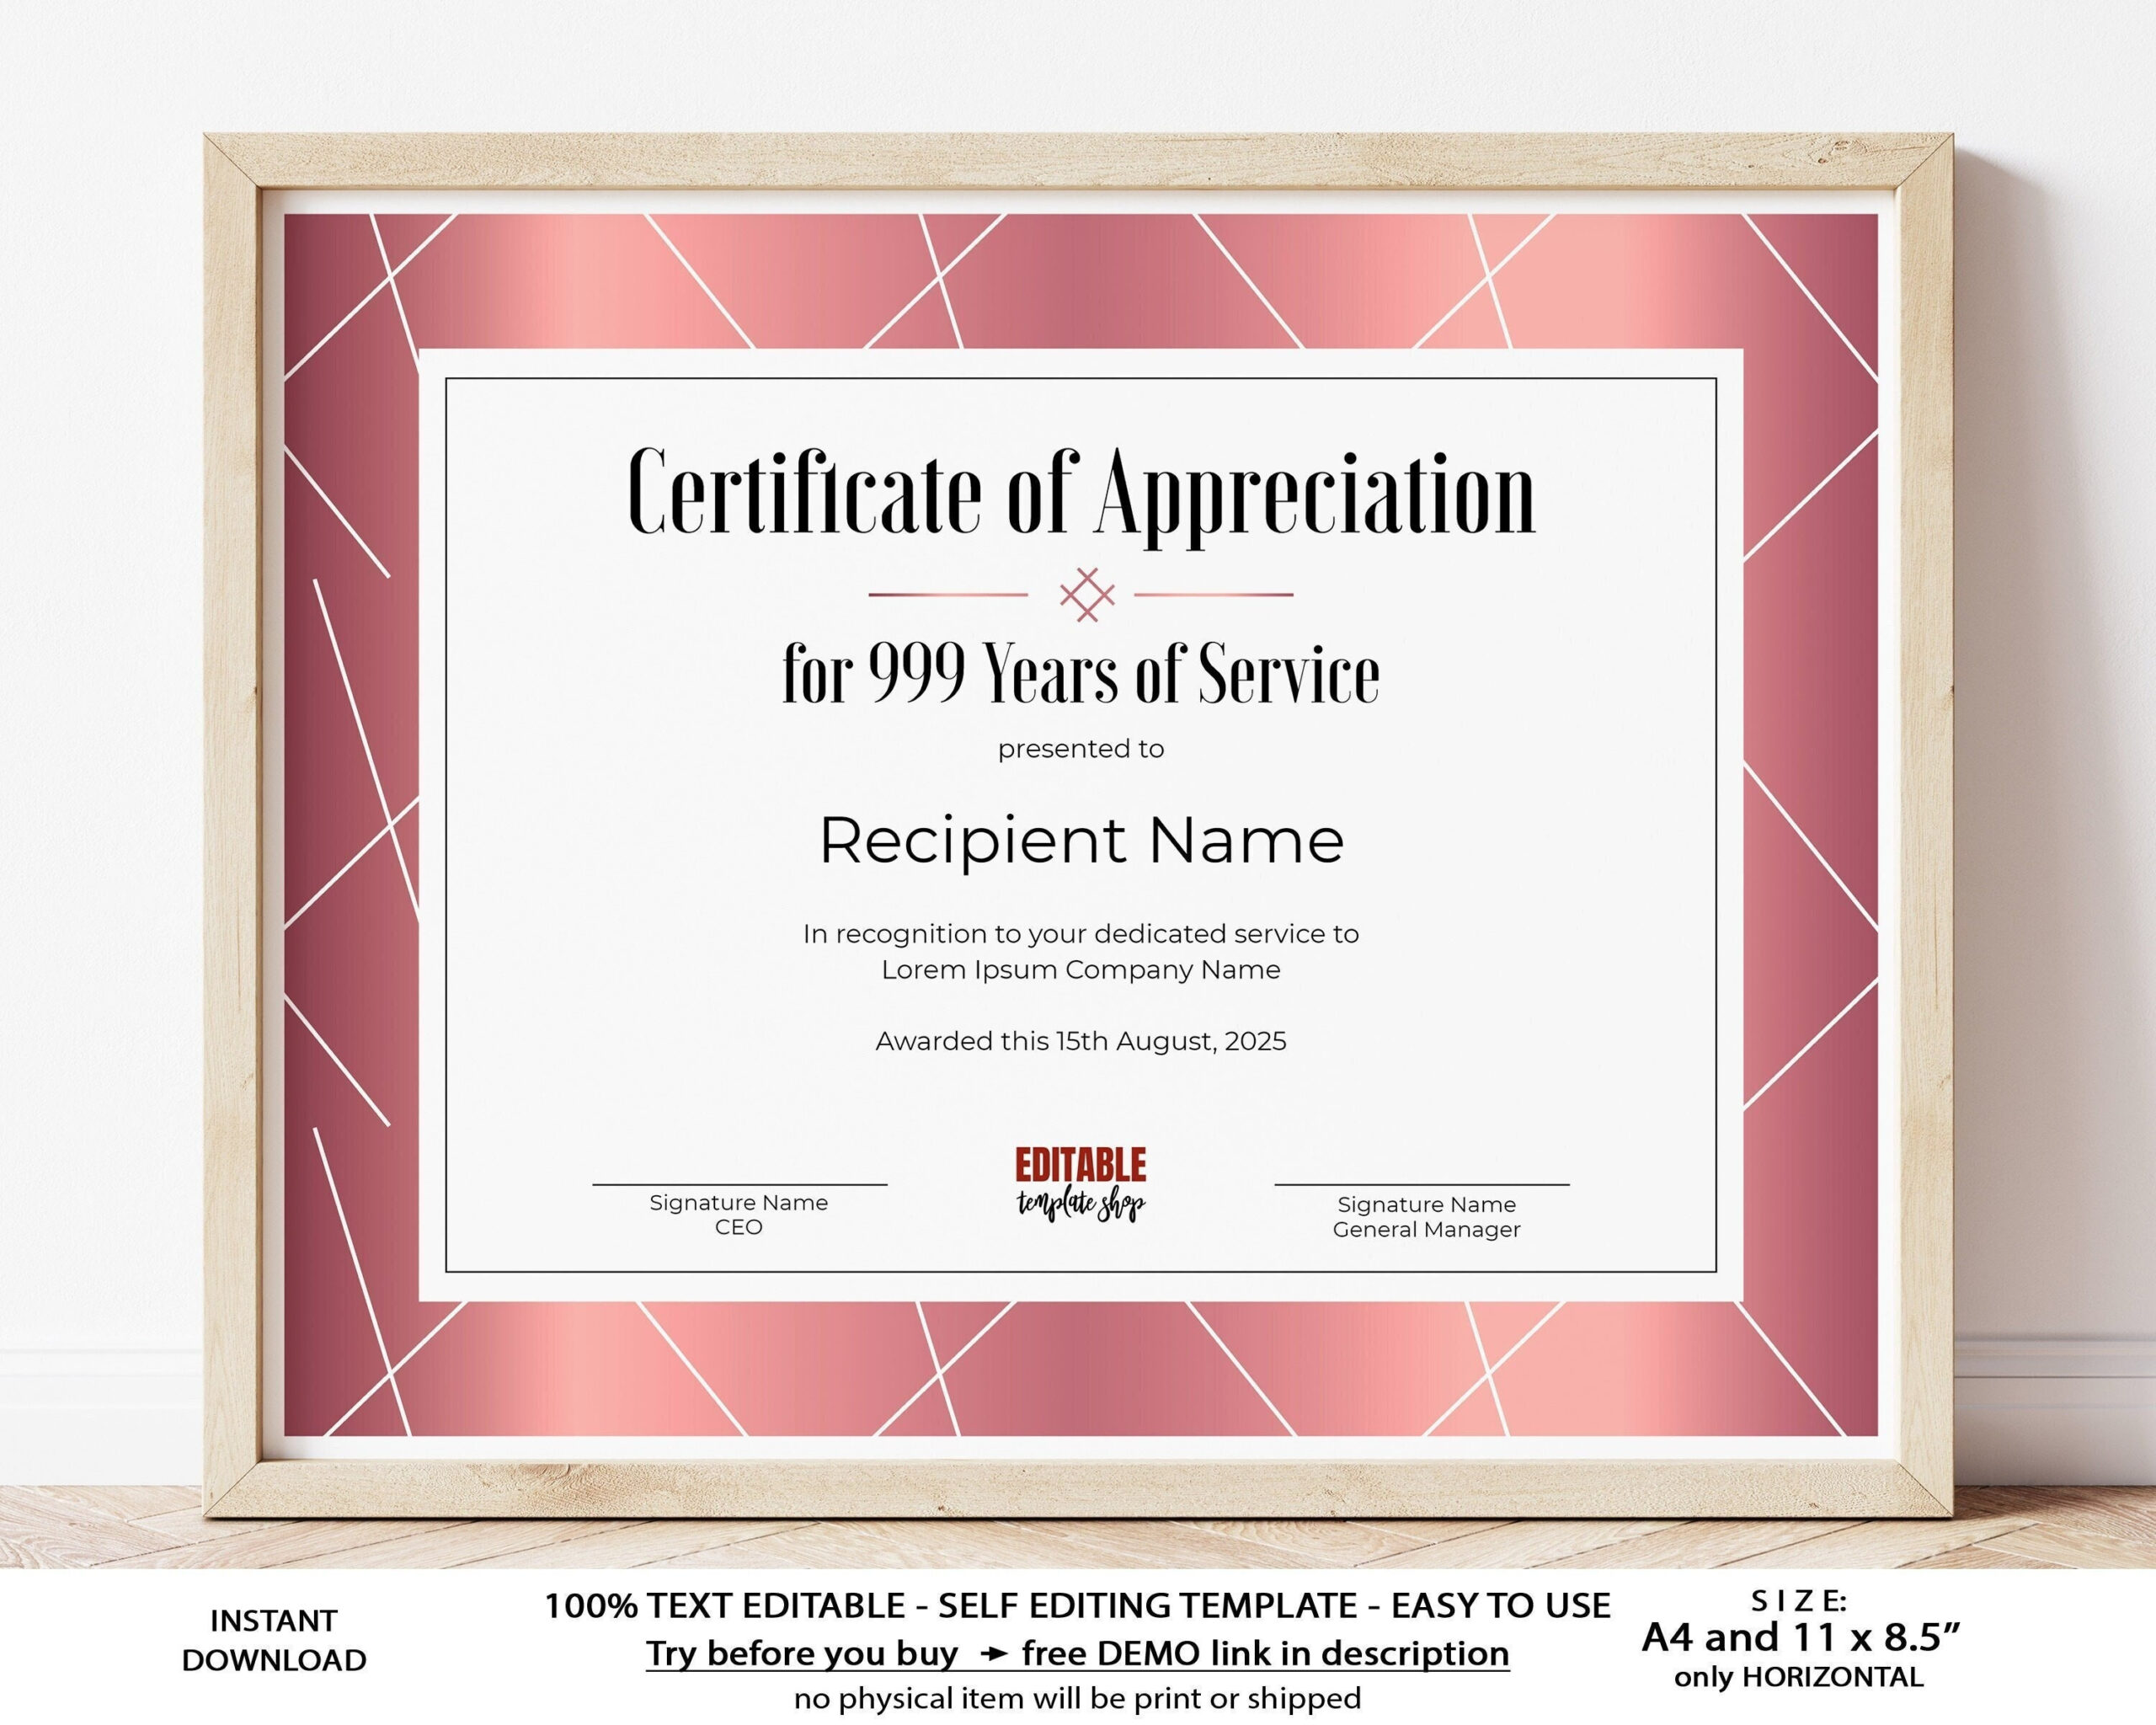 10 Years of Service EDITABLE Certificate of Appreciation - Etsy